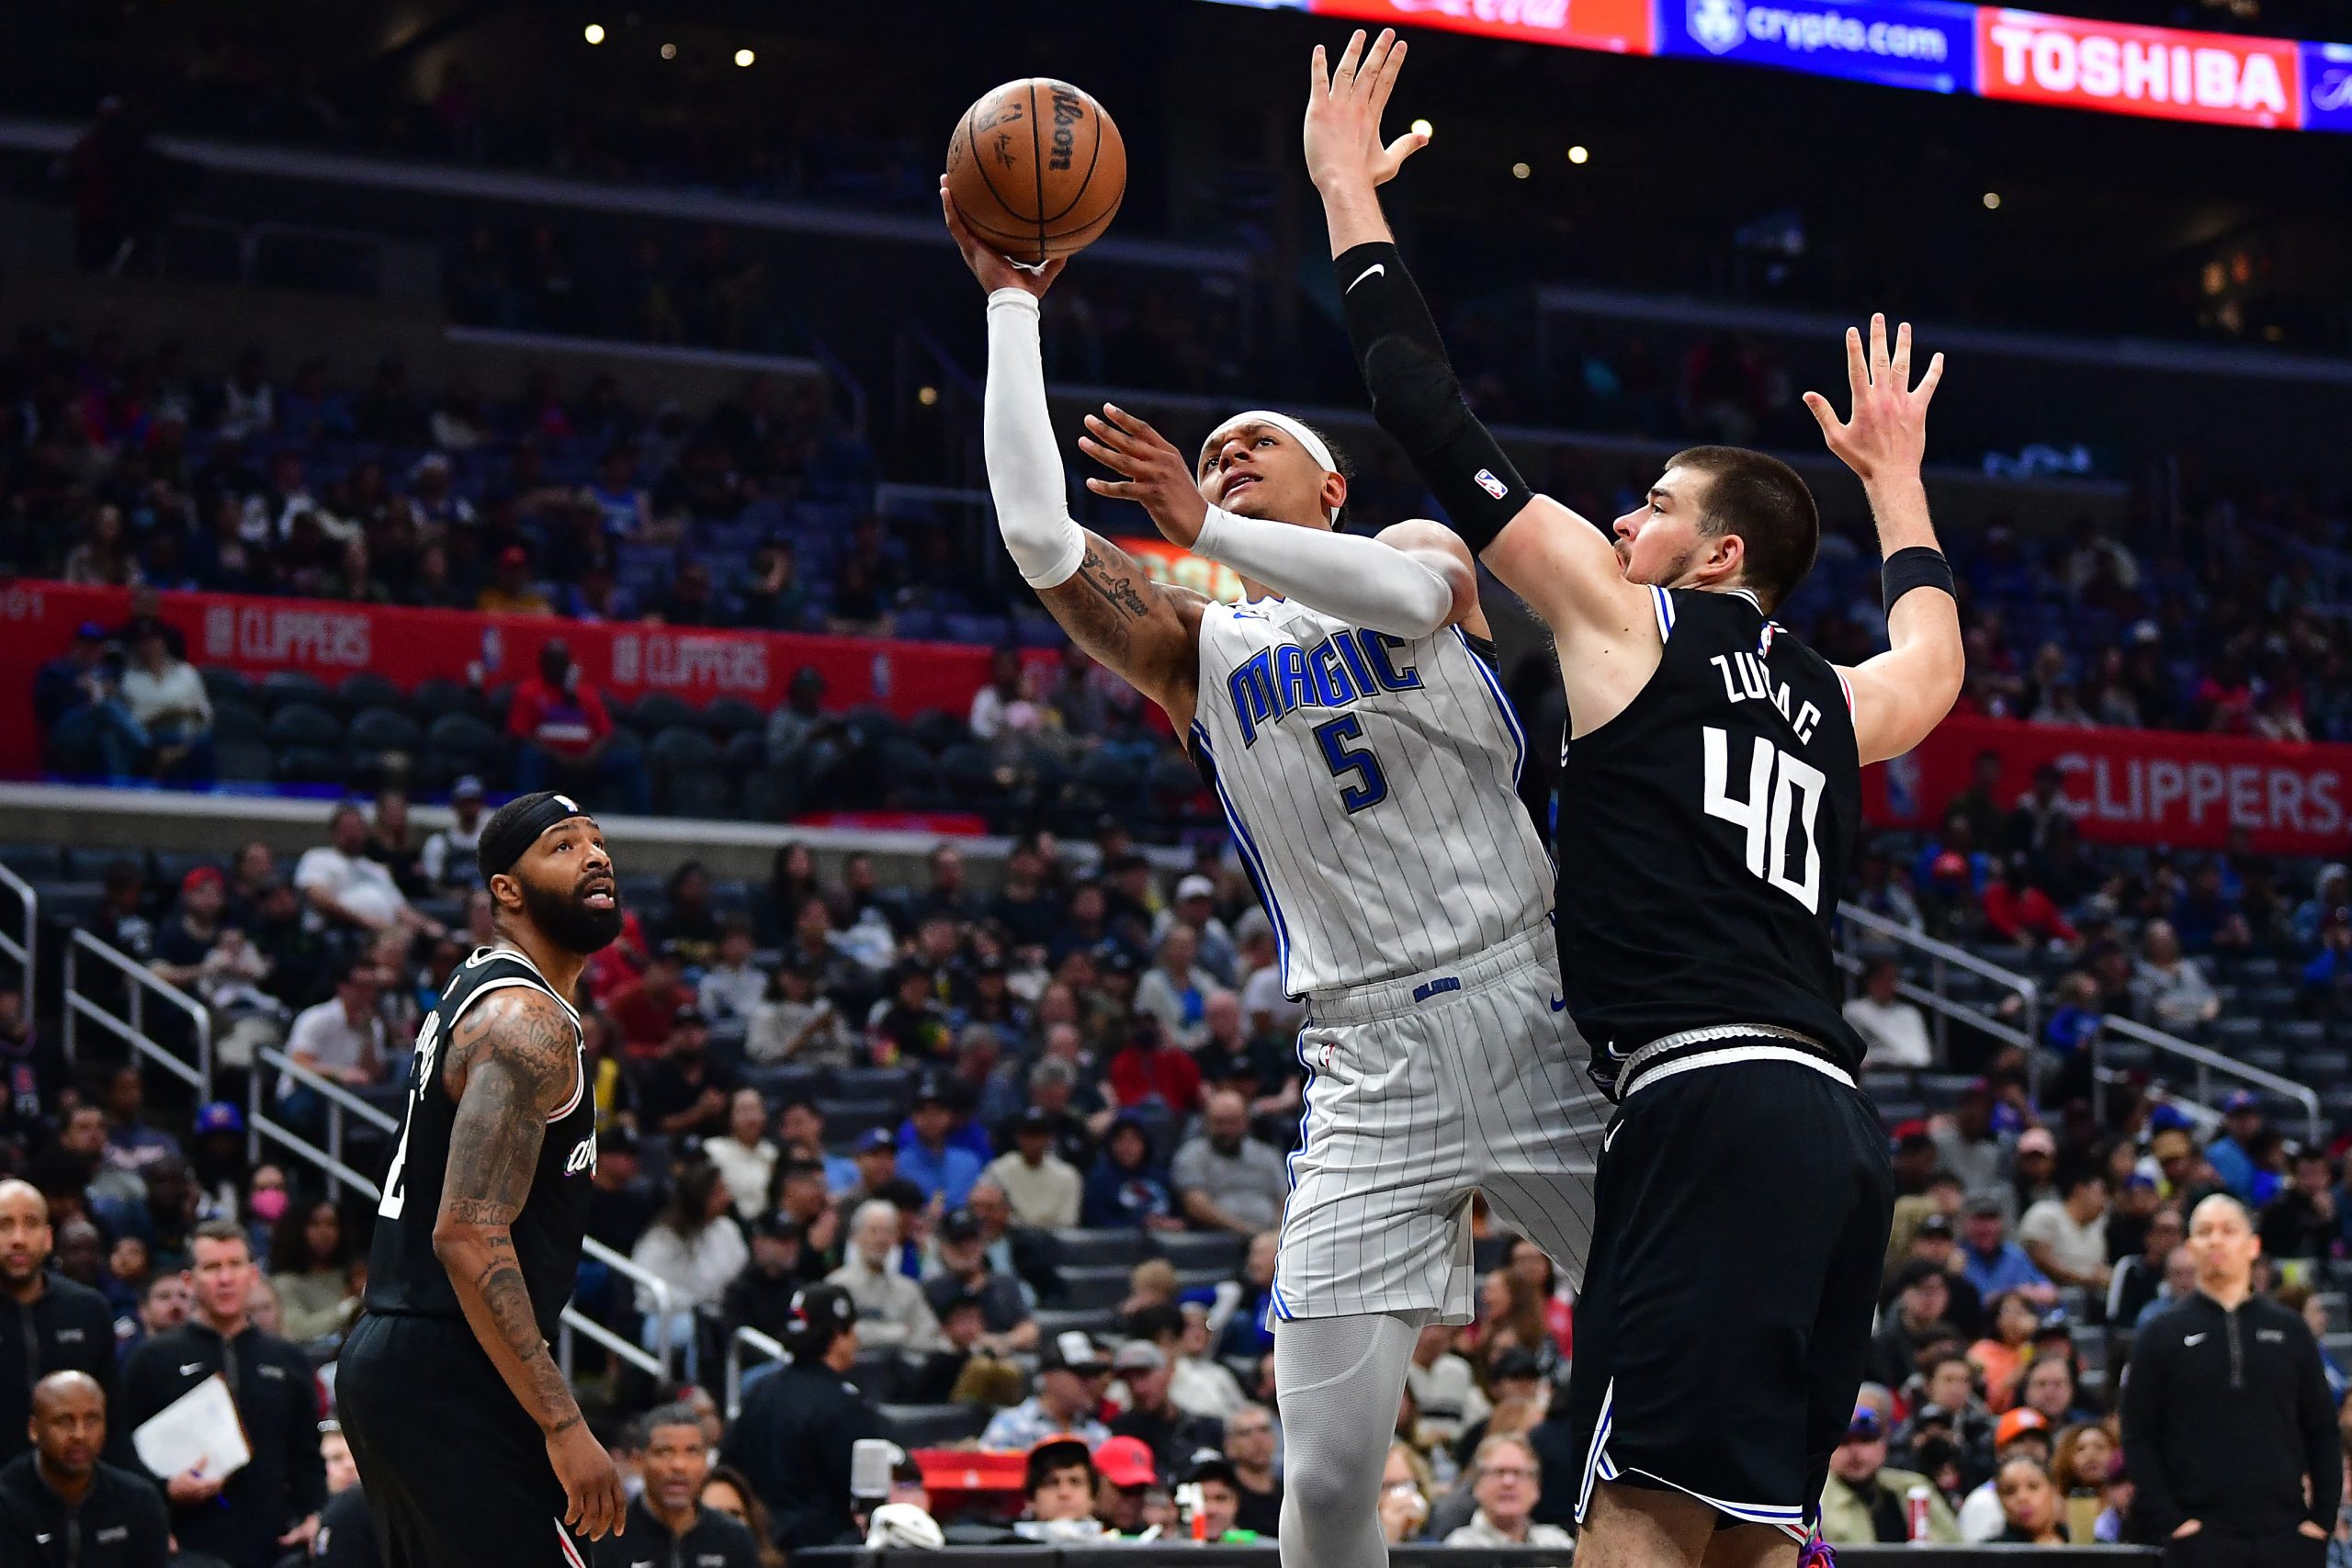 Mar 18, 2023; Los Angeles, California, USA; Orlando Magic forward Paolo Banchero (5) moves to the basket against Los Angeles Clippers center Ivica Zubac (40) during the second half at Crypto.com Arena. Mandatory Credit: Gary A. Vasquez-USA TODAY Sports Photo: Gary A. Vasquez/REUTERS